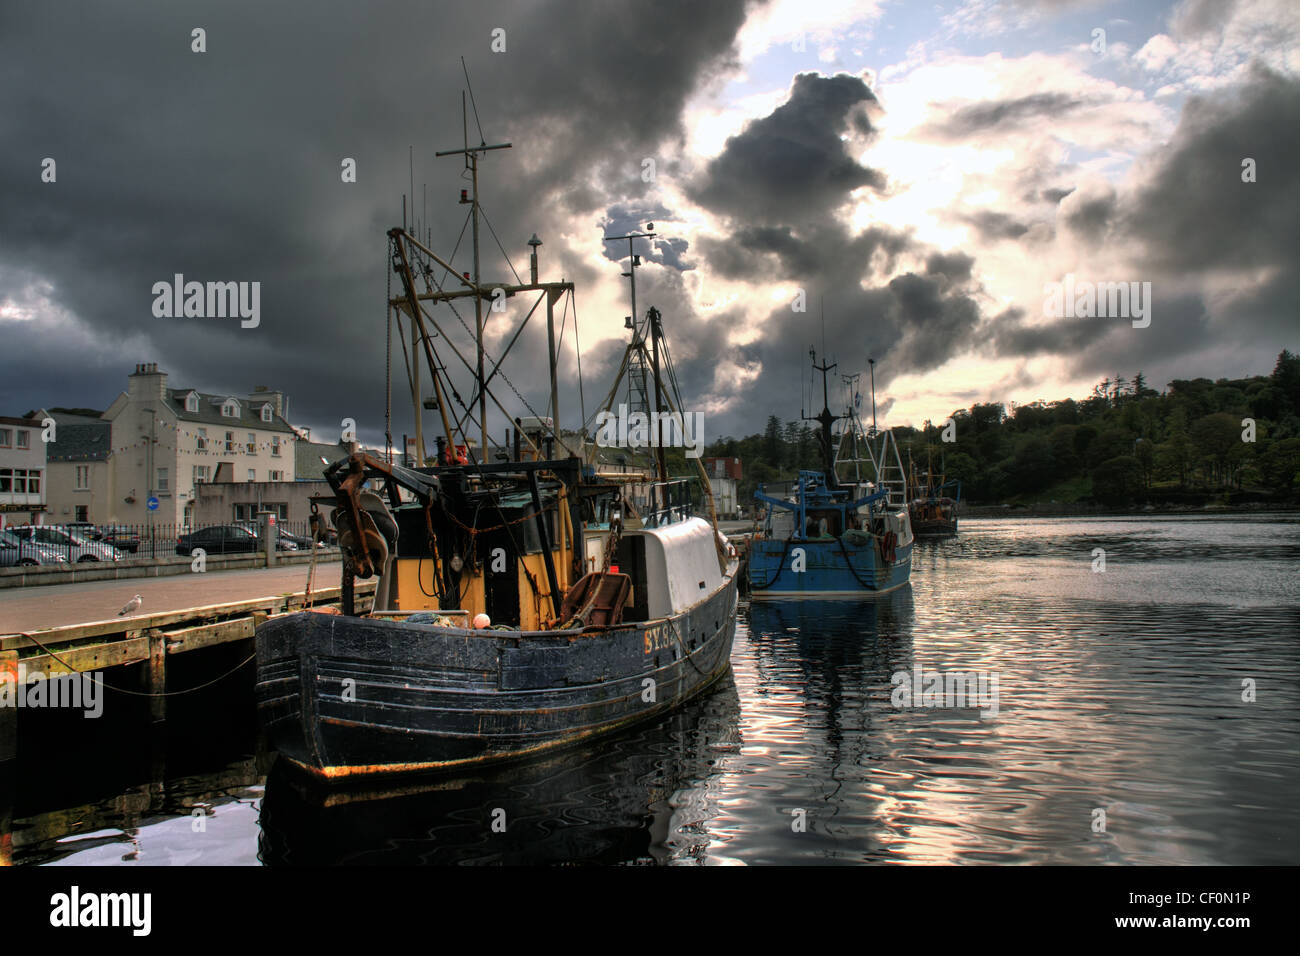 Traditional fishing boats and a dramatic sky in Stornoway harbour, Western Isles, Scotland, United Kingdom Stock Photo